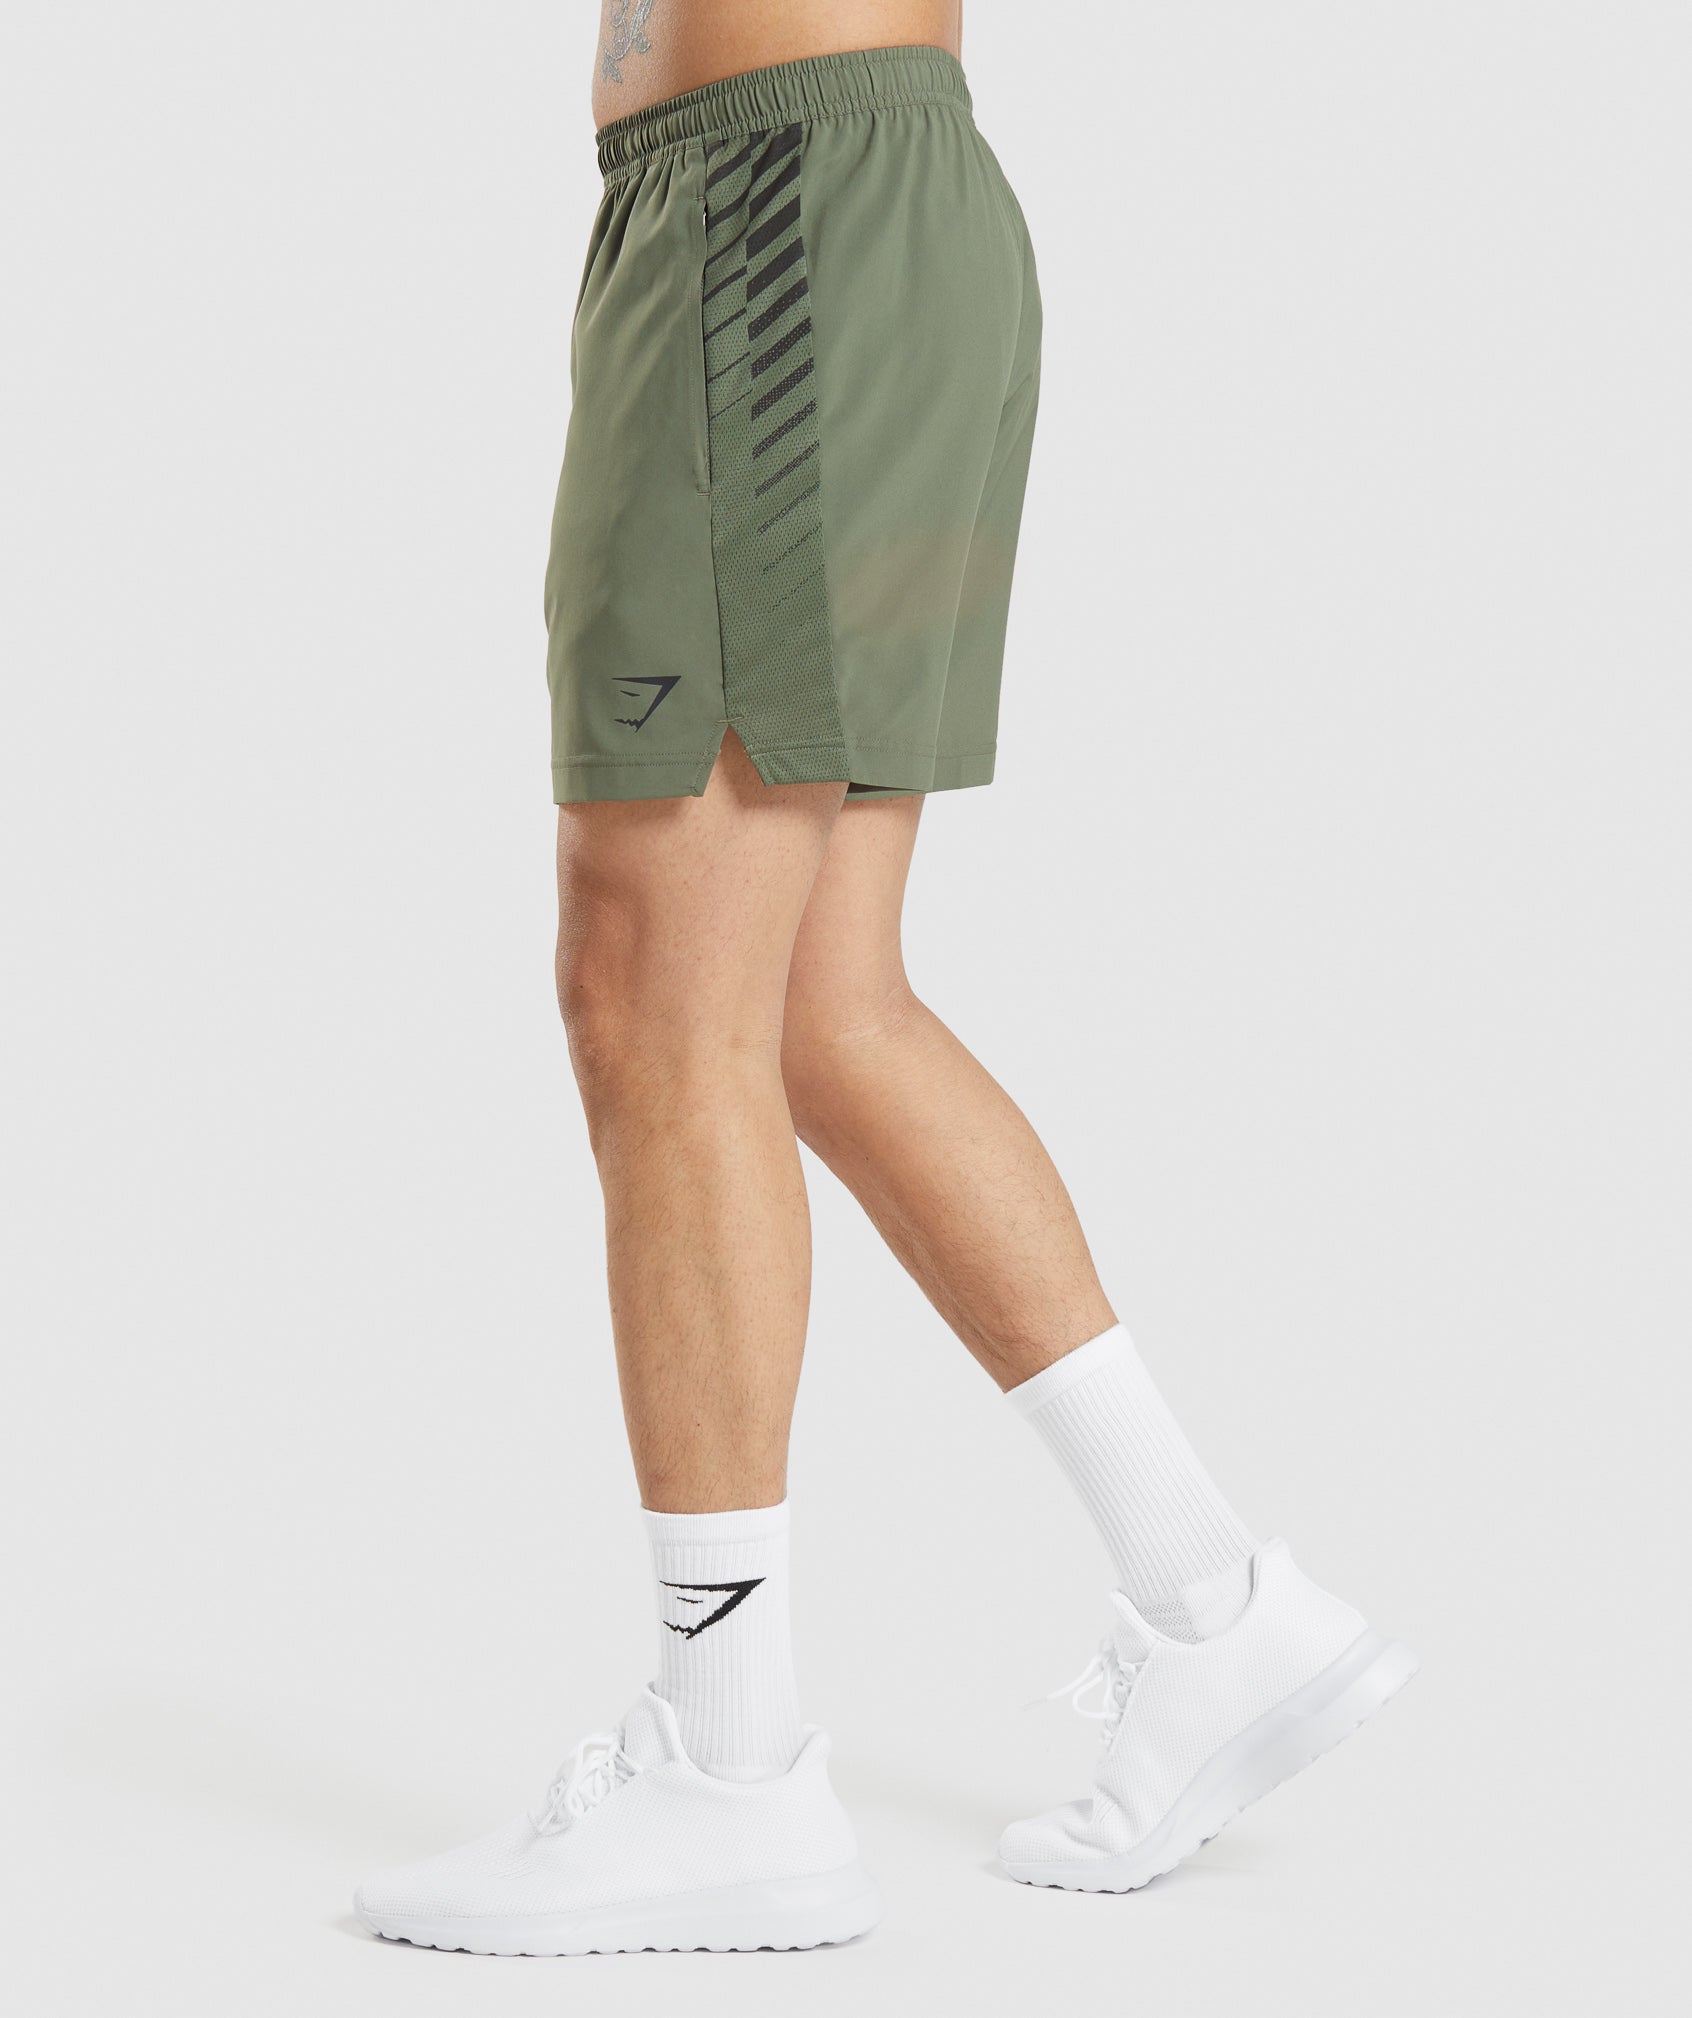 Sport Stripe 7" Shorts in Core Olive - view 3